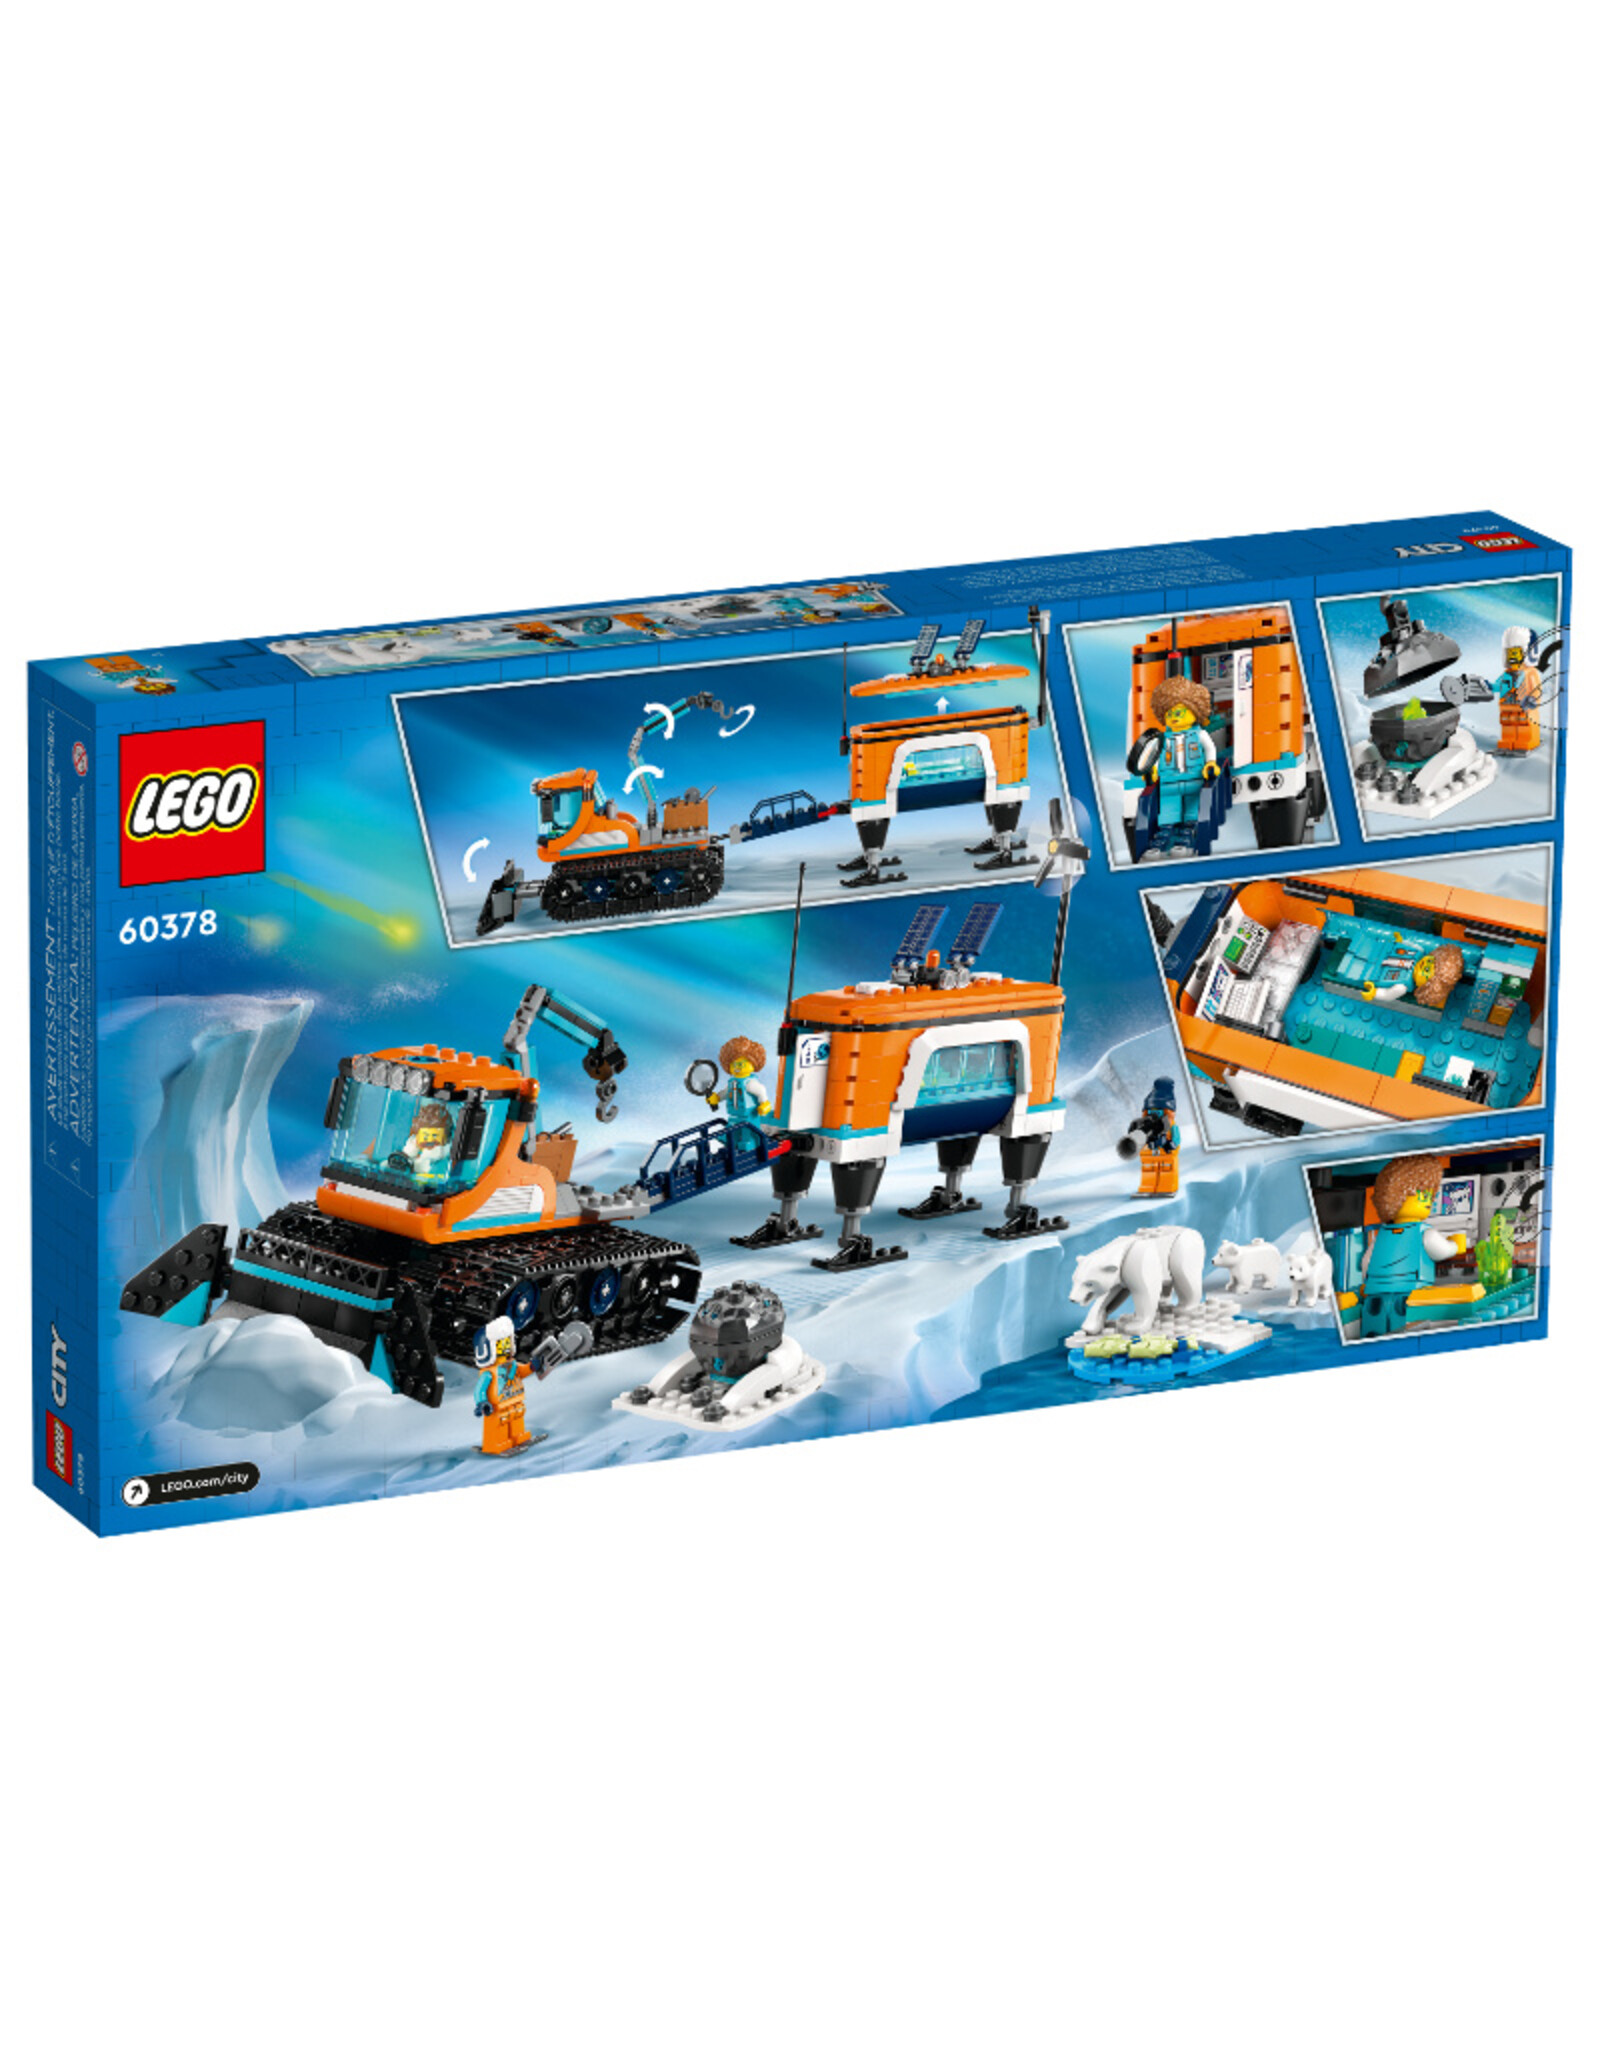 LEGO City 60378 Arctic Explorer Truck and Mobile Lab